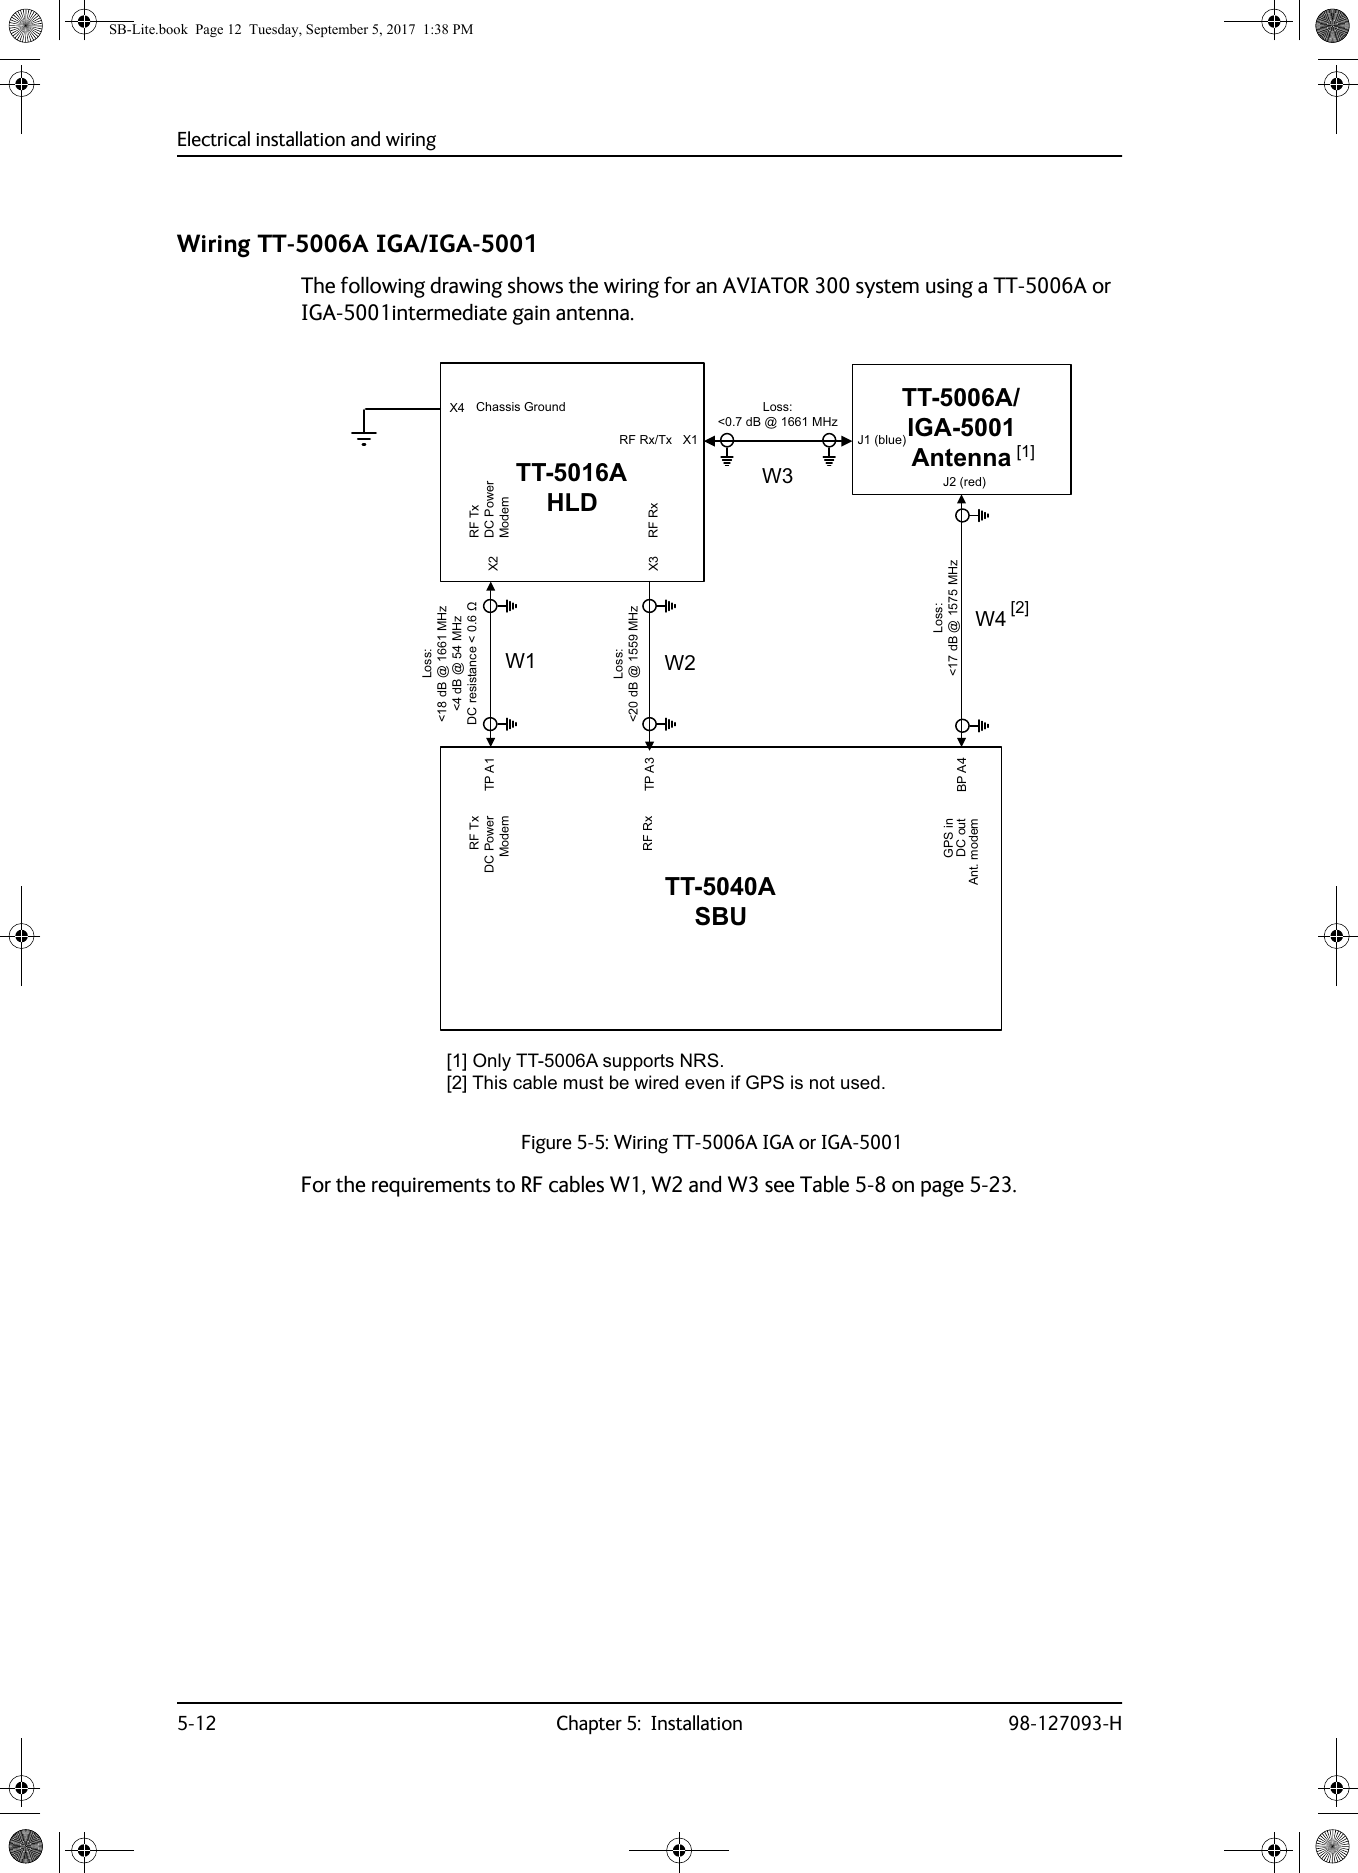 Electrical installation and wiring5-12 Chapter 5:  Installation 98-127093-HWiring TT-5006A IGA/IGA-5001The following drawing shows the wiring for an AVIATOR 300 system using a TT-5006A or IGA-5001intermediate gain antenna.For the requirements to RF cables W1, W2 and W3 see Table  5-8 on page  5-23.Figure 5-5:  Wiring TT-5006A IGA or IGA-500177$6%877$+/&apos;73$73$;;;%3$*36LQ&apos;&amp;RXW$QWPRGHP: :::;77$,*$$QWHQQD-EOXH-UHG/RVVG%#0+]/RVVG%#0+]/RVVG%#0+]G%#0+]&apos;&amp;UHVLVWDQFHȍ/RVVG%#0+]5)7[&apos;&amp;3RZHU0RGHP5)5[5)7[&apos;&amp;3RZHU0RGHP&amp;KDVVLV*URXQG5)5[7[5)5[&gt;@2QO\77$VXSSRUWV156&gt;@7KLVFDEOHPXVWEHZLUHGHYHQLI*36LVQRWXVHG&gt;@&gt;@SB-Lite.book  Page 12  Tuesday, September 5, 2017  1:38 PM